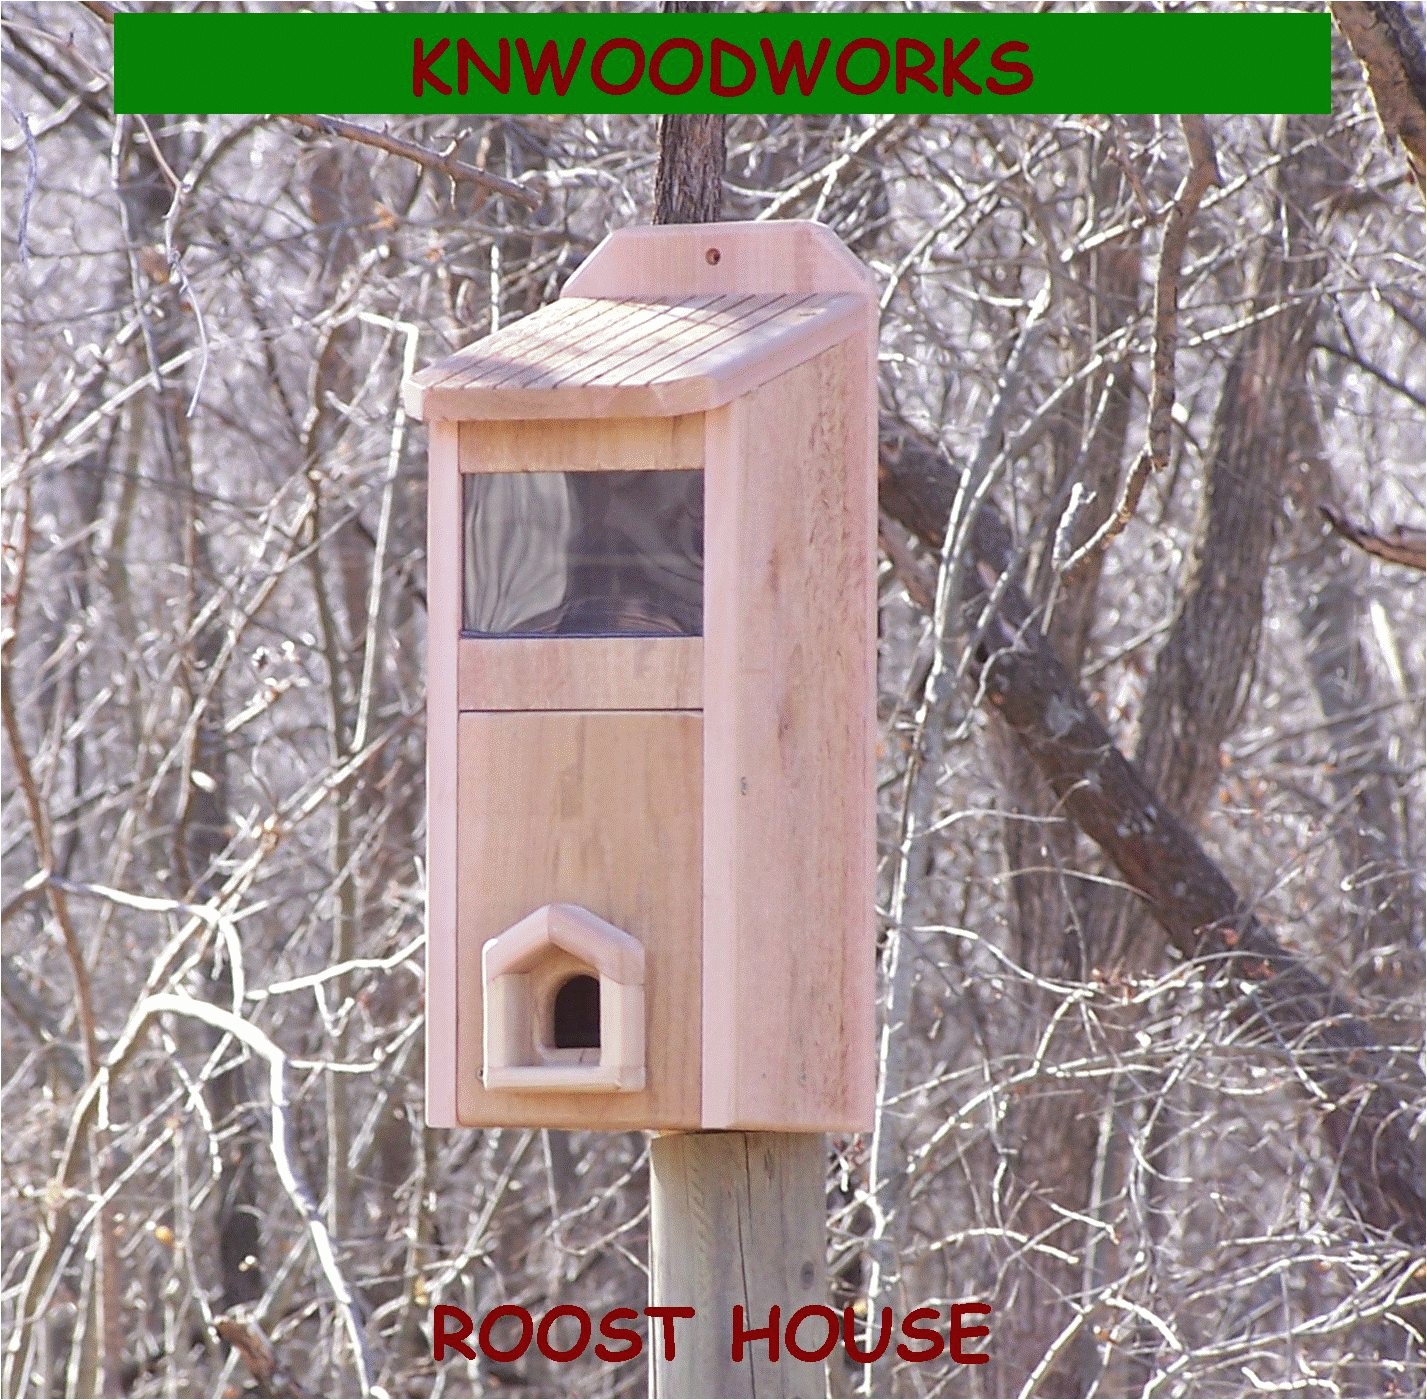 Winter Bird House Plans Best 28 Roosting Box Plans Winter Bird Shelter and